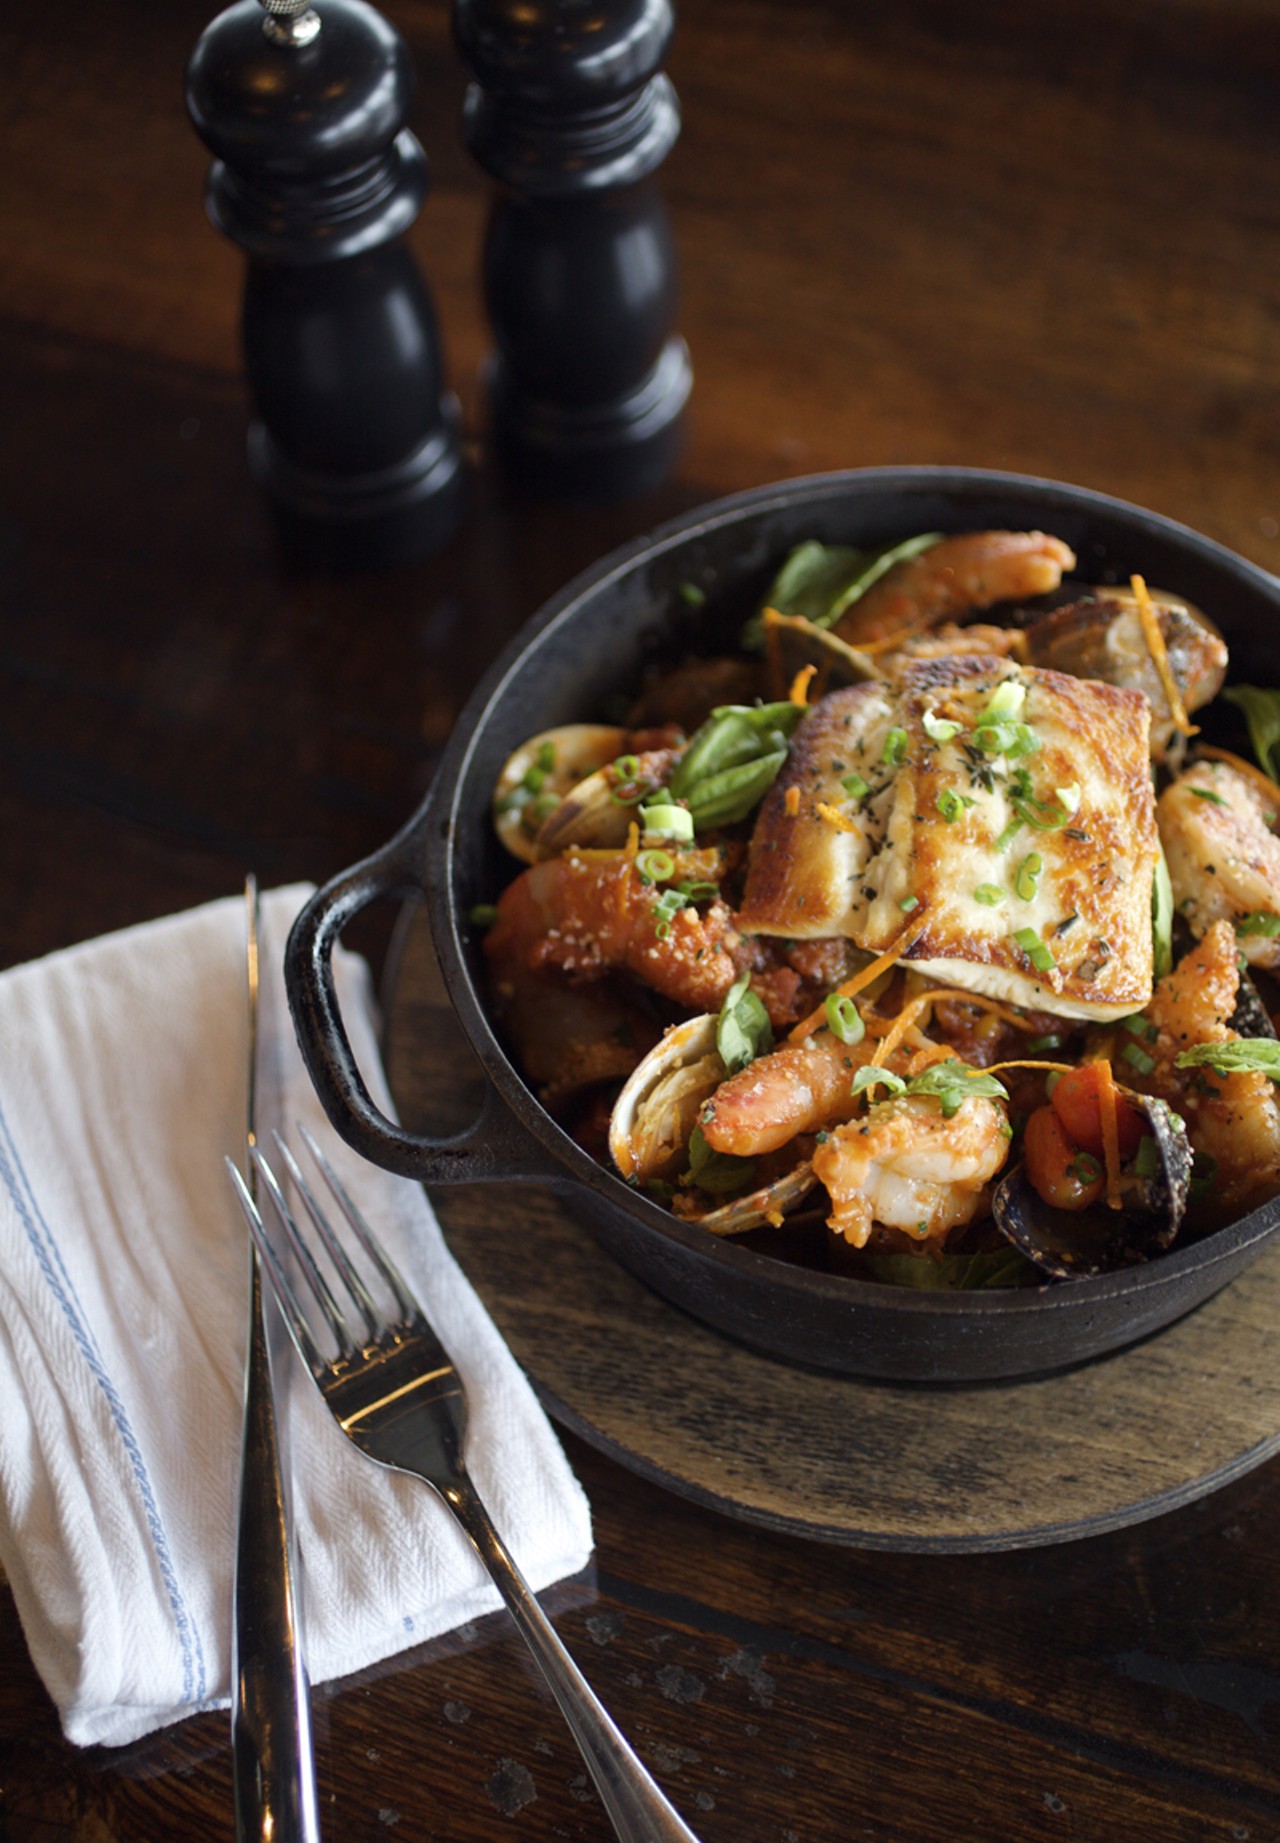 The Fisherman's Stew is prepared with Halibut, Clams, Mussels and Shrimp.